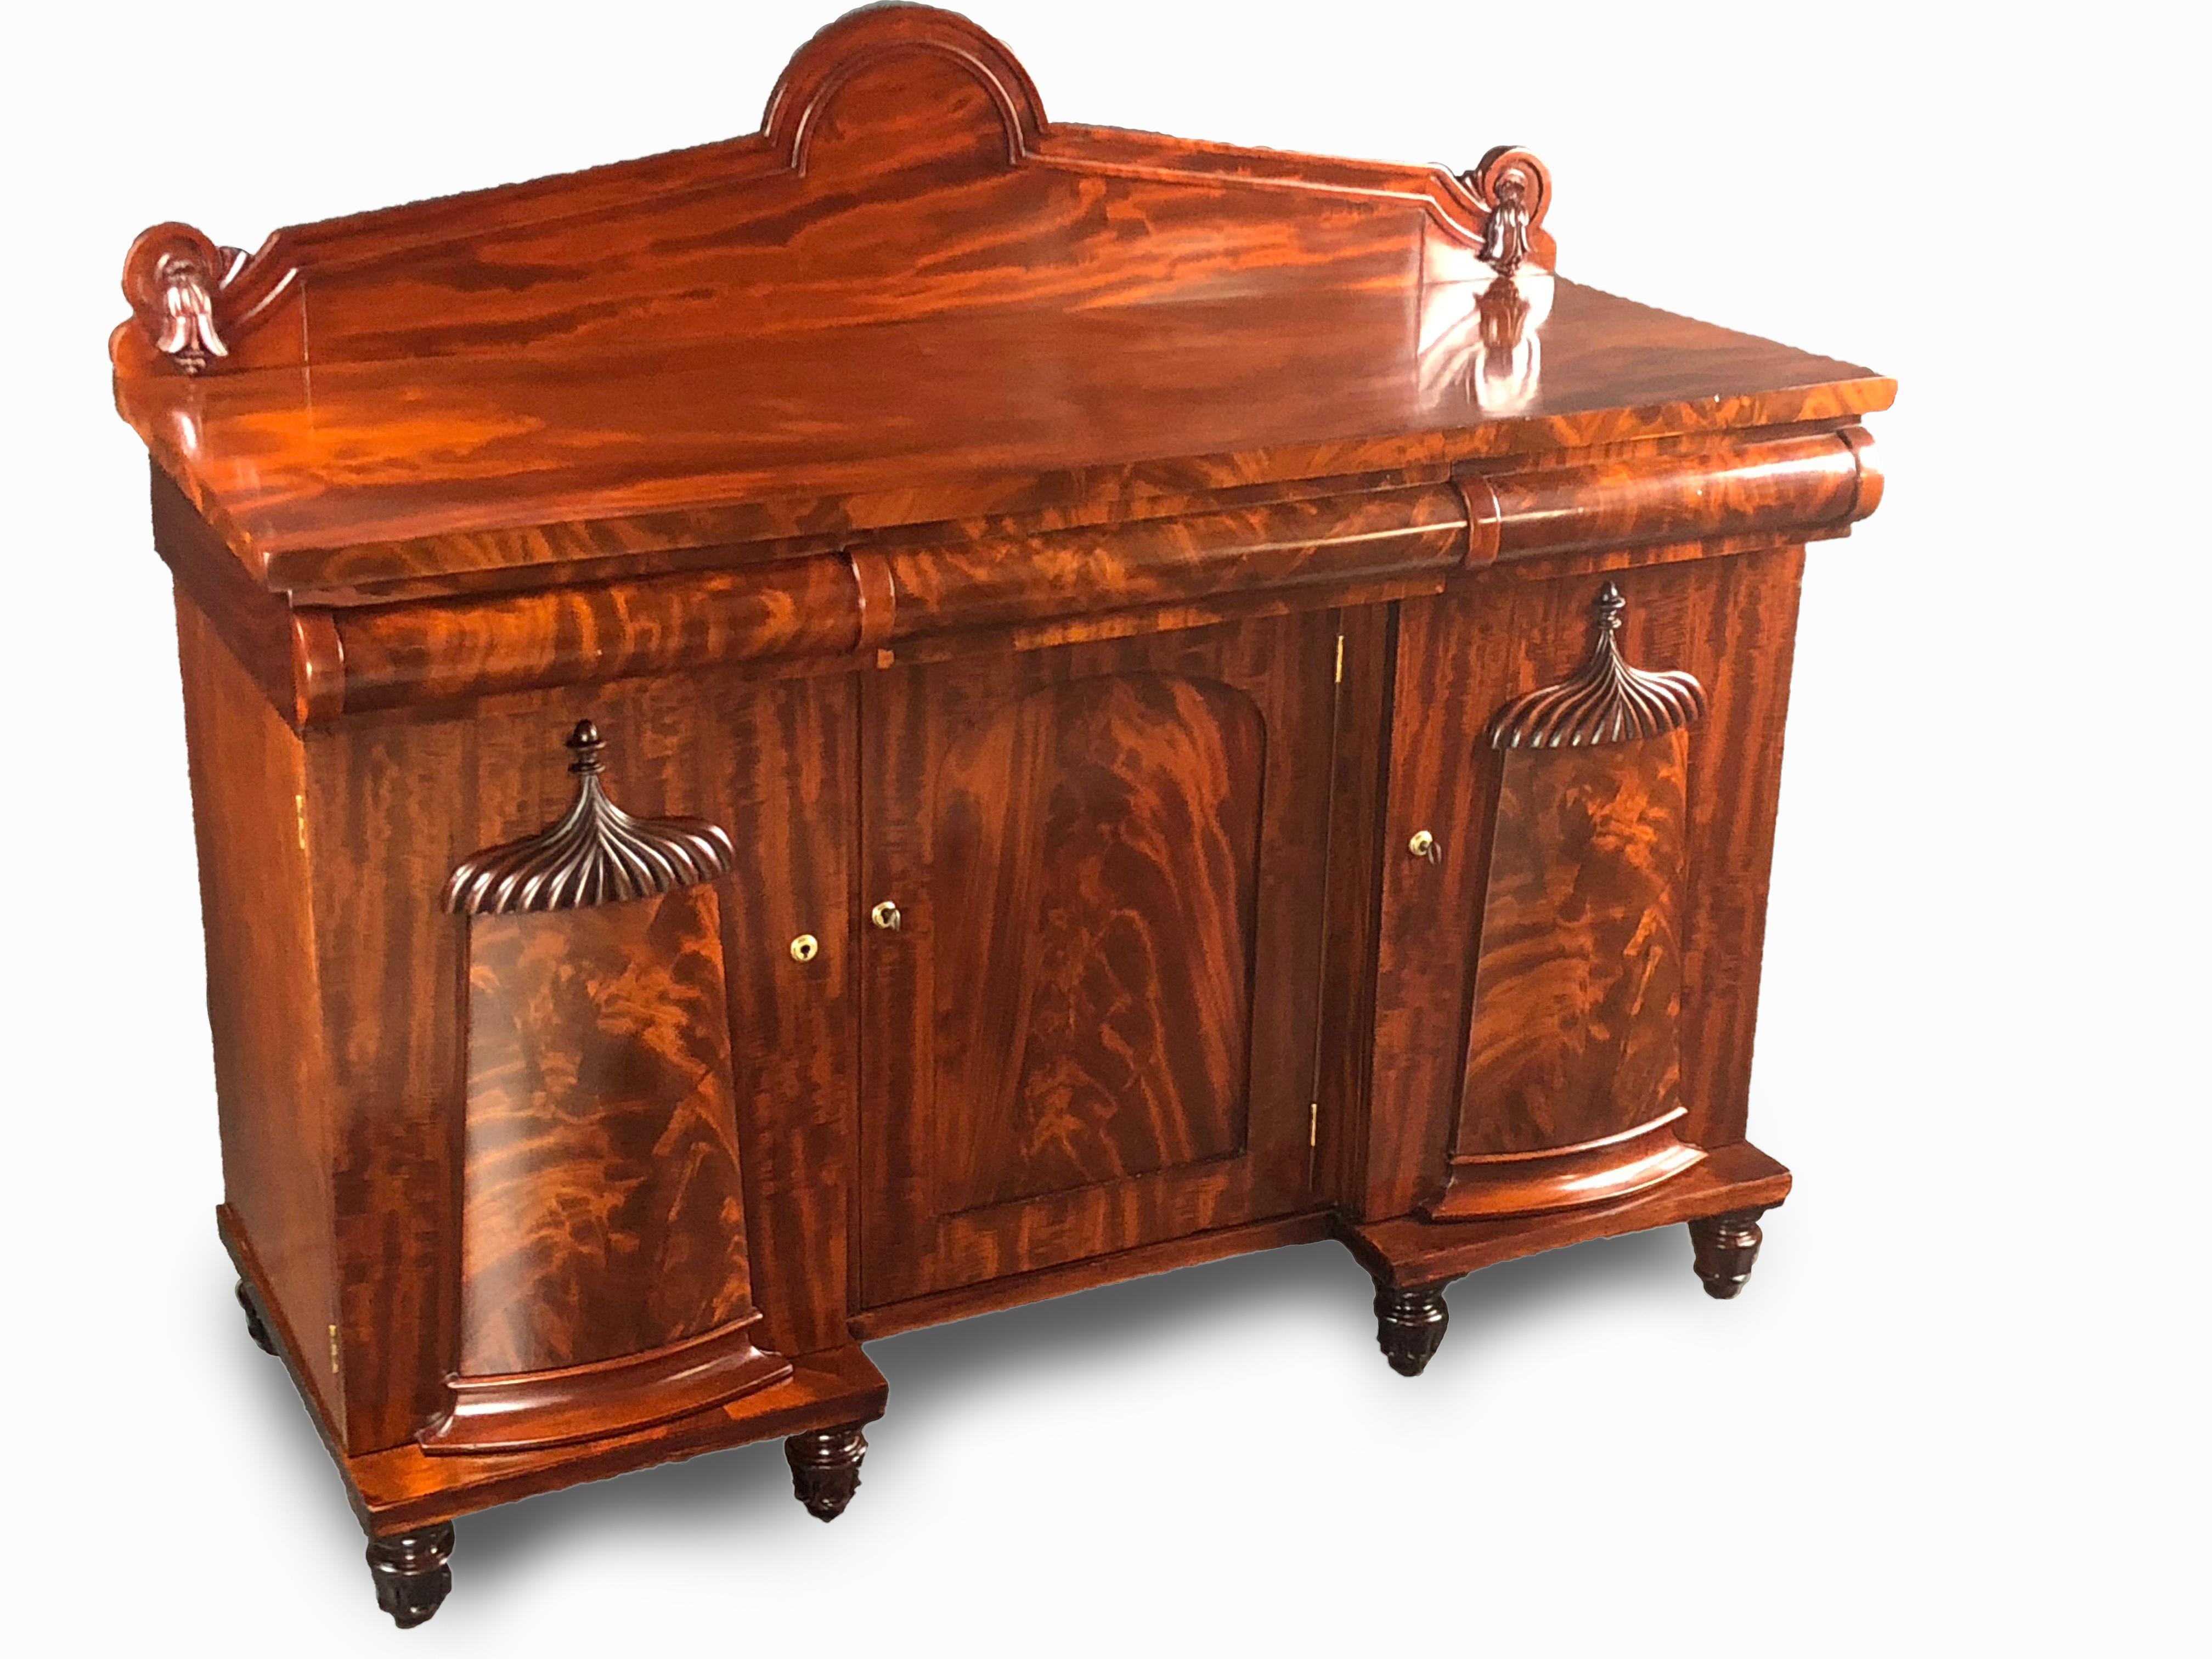 Exceptional Victorian medium size breakfront sideboard featuring unusual designs and carvings with exquisitely matched mahogany veneers. The removable backsplash with finely carved floral designs at each end. Below it, three mahogany round fronted